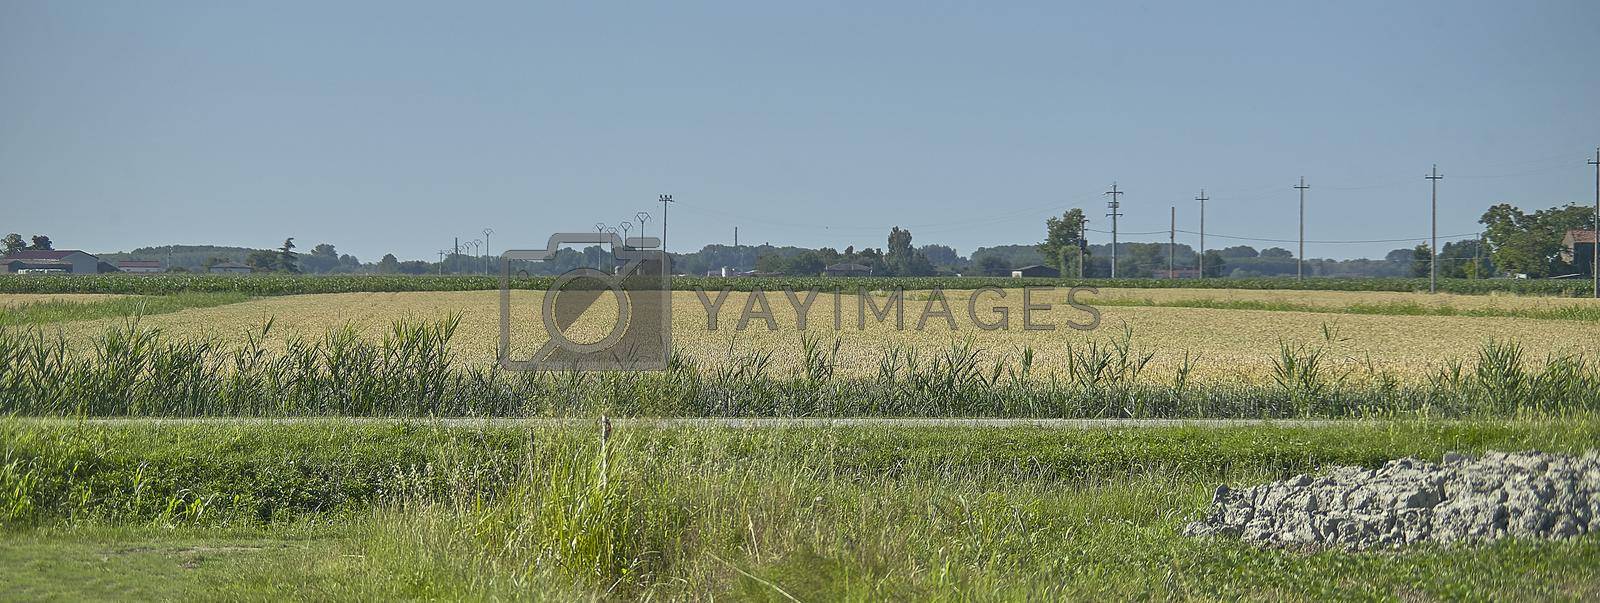 Countryside landscape detail, banner image with copy space